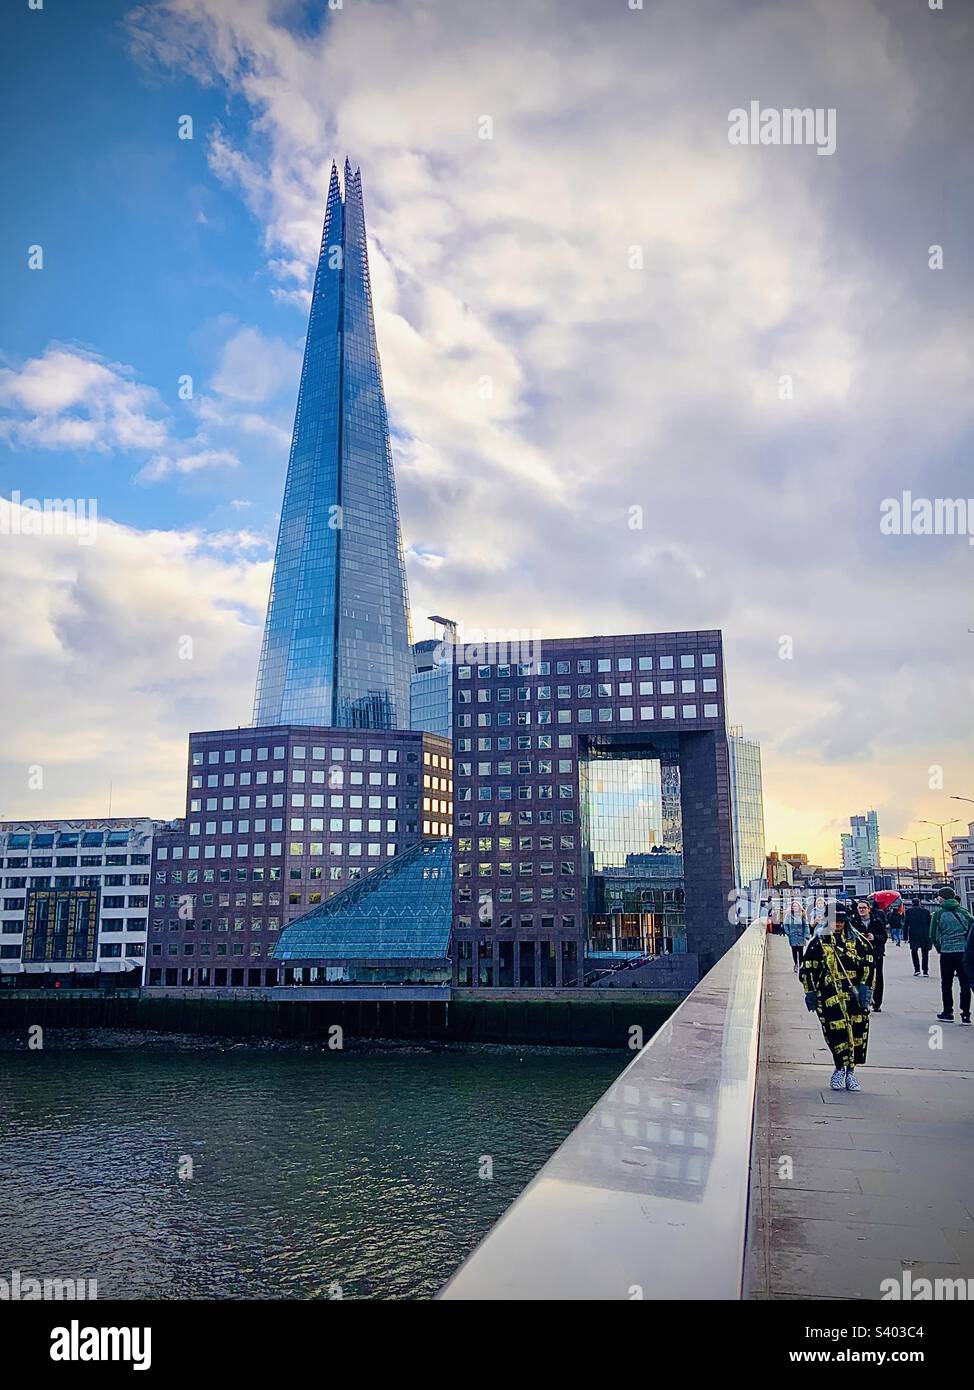 Lady in long coat walking along London Bridge with The Shard behind her Stock Photo